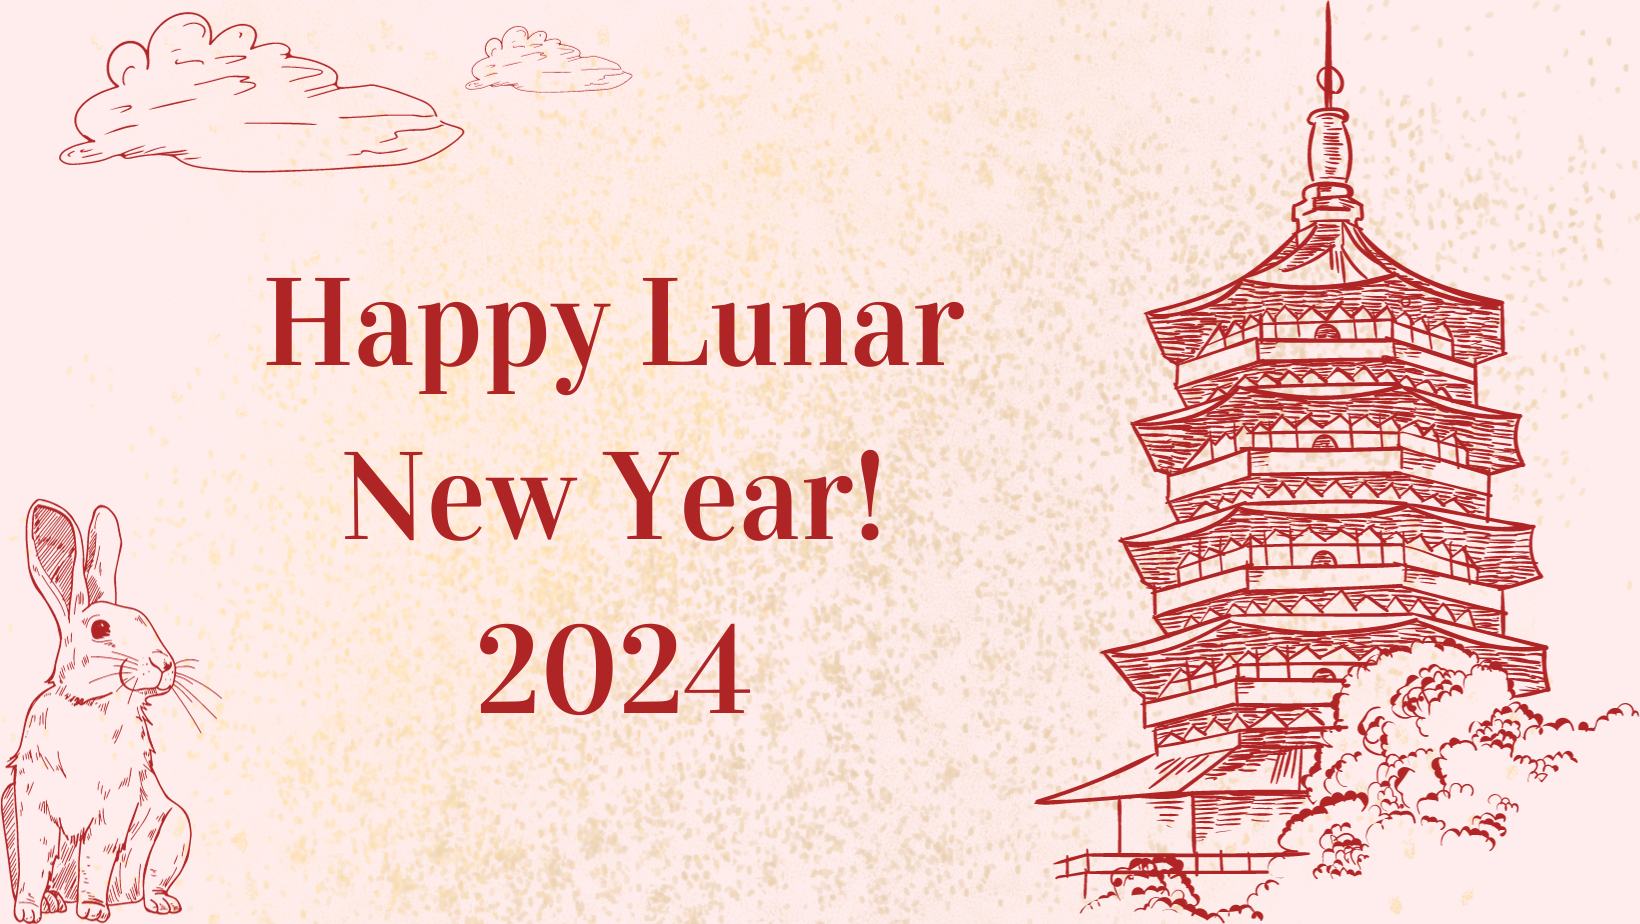 15 Heartwarming Lunar New Year 2024 Blessings, Quotes, and Messages